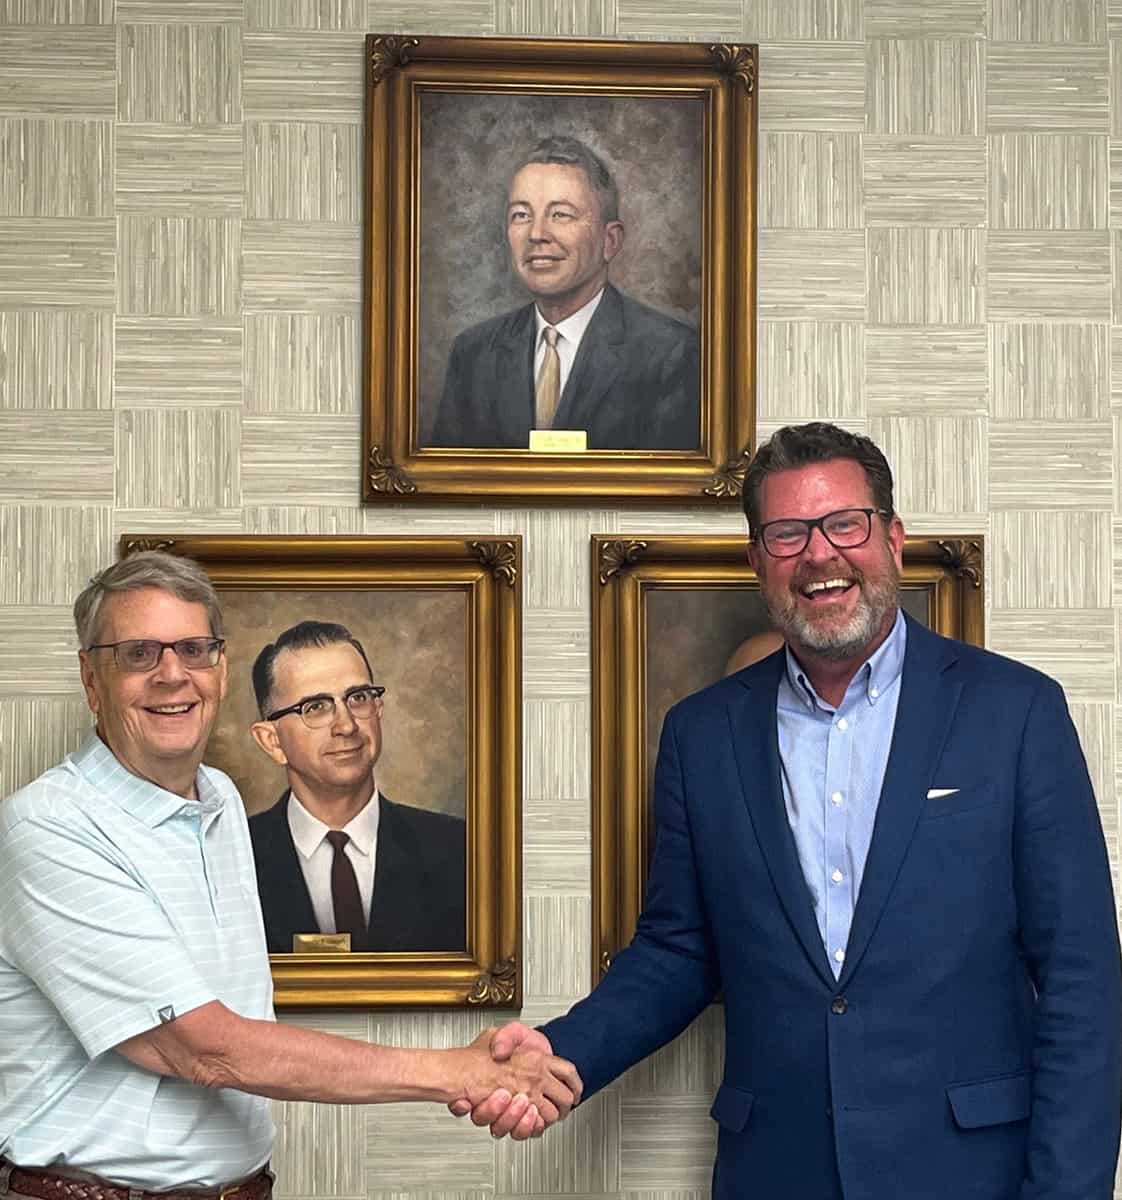 SGTC President Dr. John Watford (right) is shown above with Lofton Odom looking at the Presidential Portrait of his father, Horace Odom, (center top) which hangs in the Odom Center Conference room on the Americus campus.